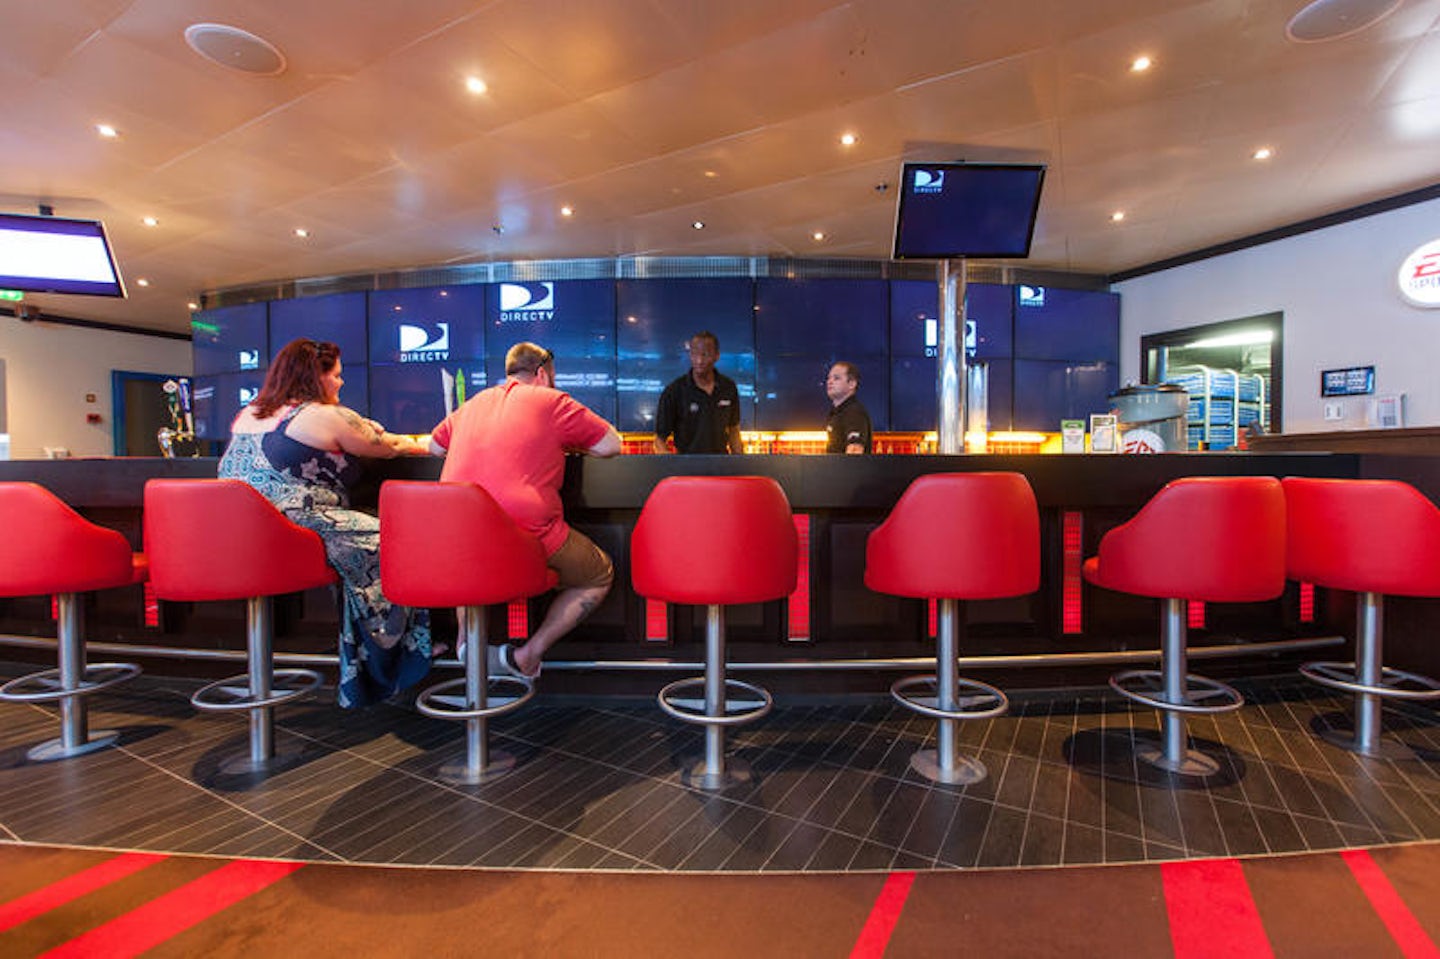 The Sports Bar on Carnival Conquest